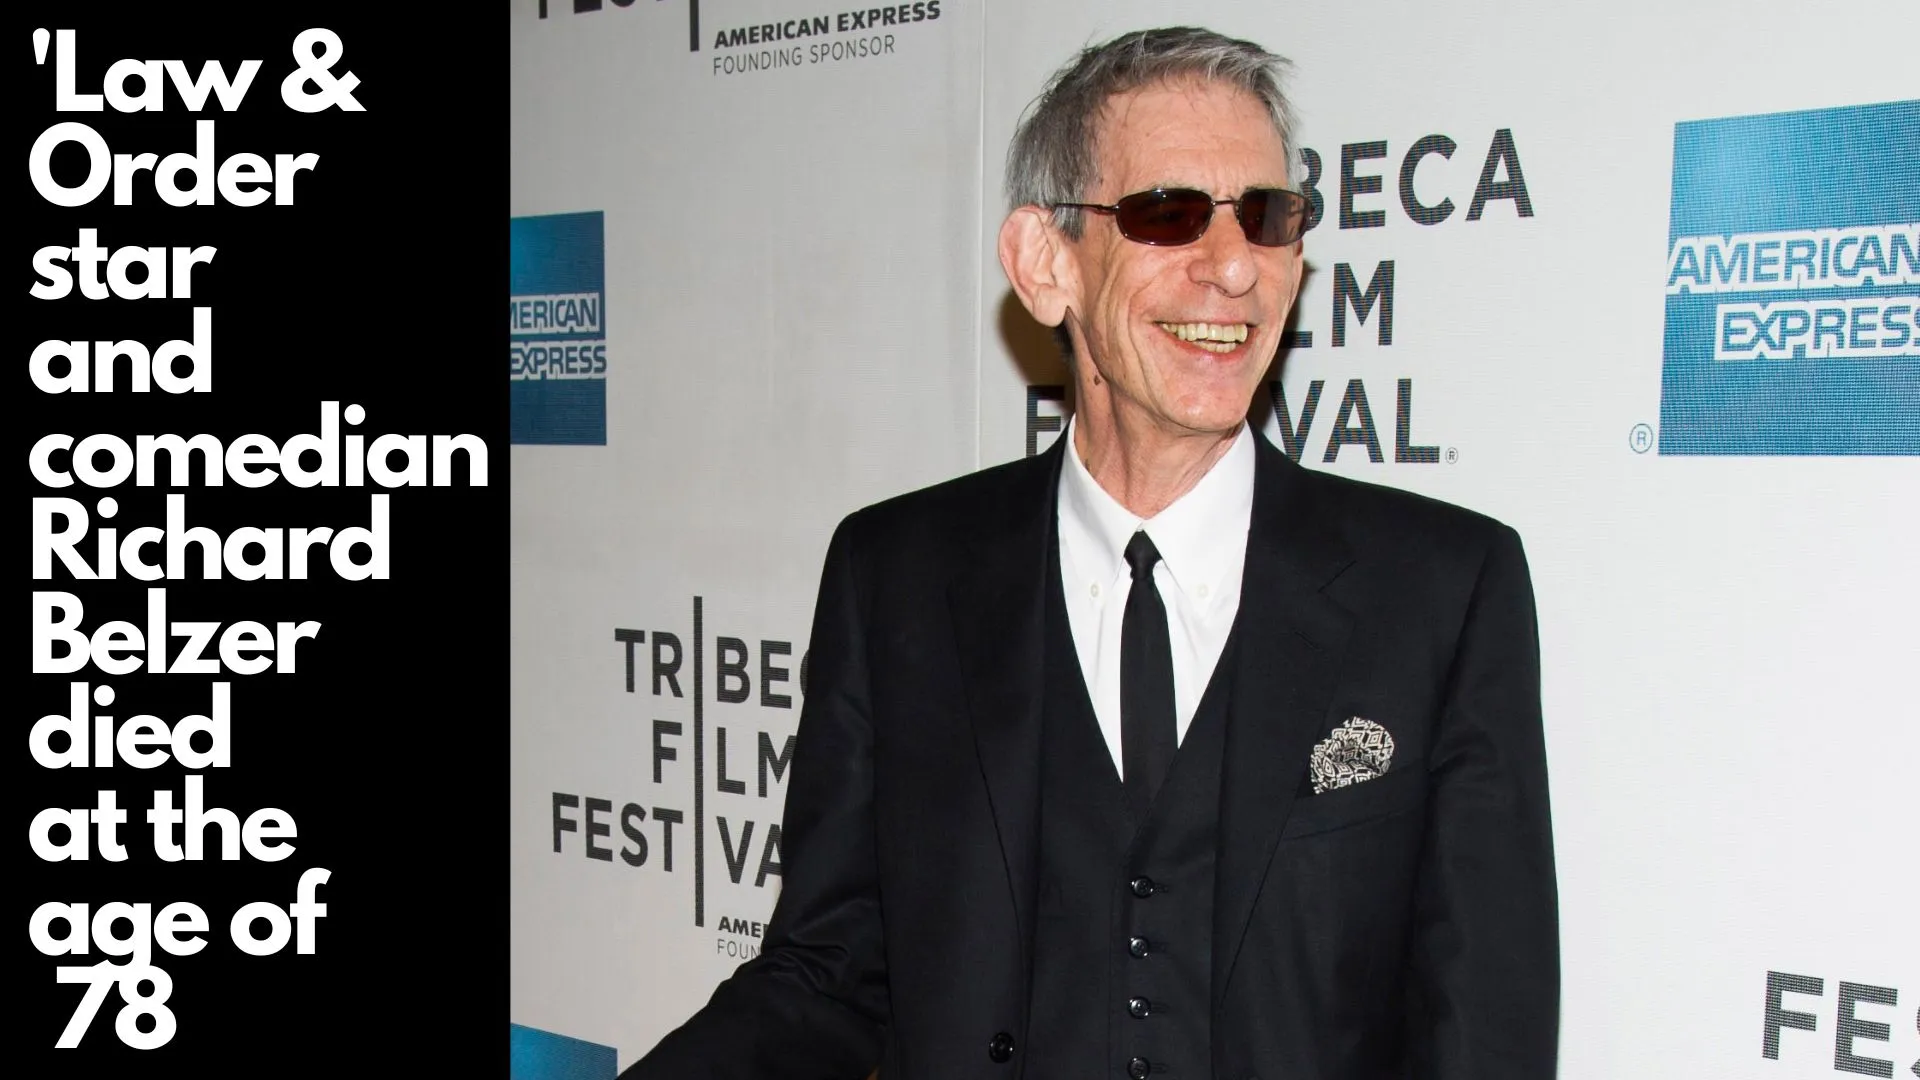 'Law & Order star and comedian Richard Belzer died at the age of 78 (Image credit: WYYY)